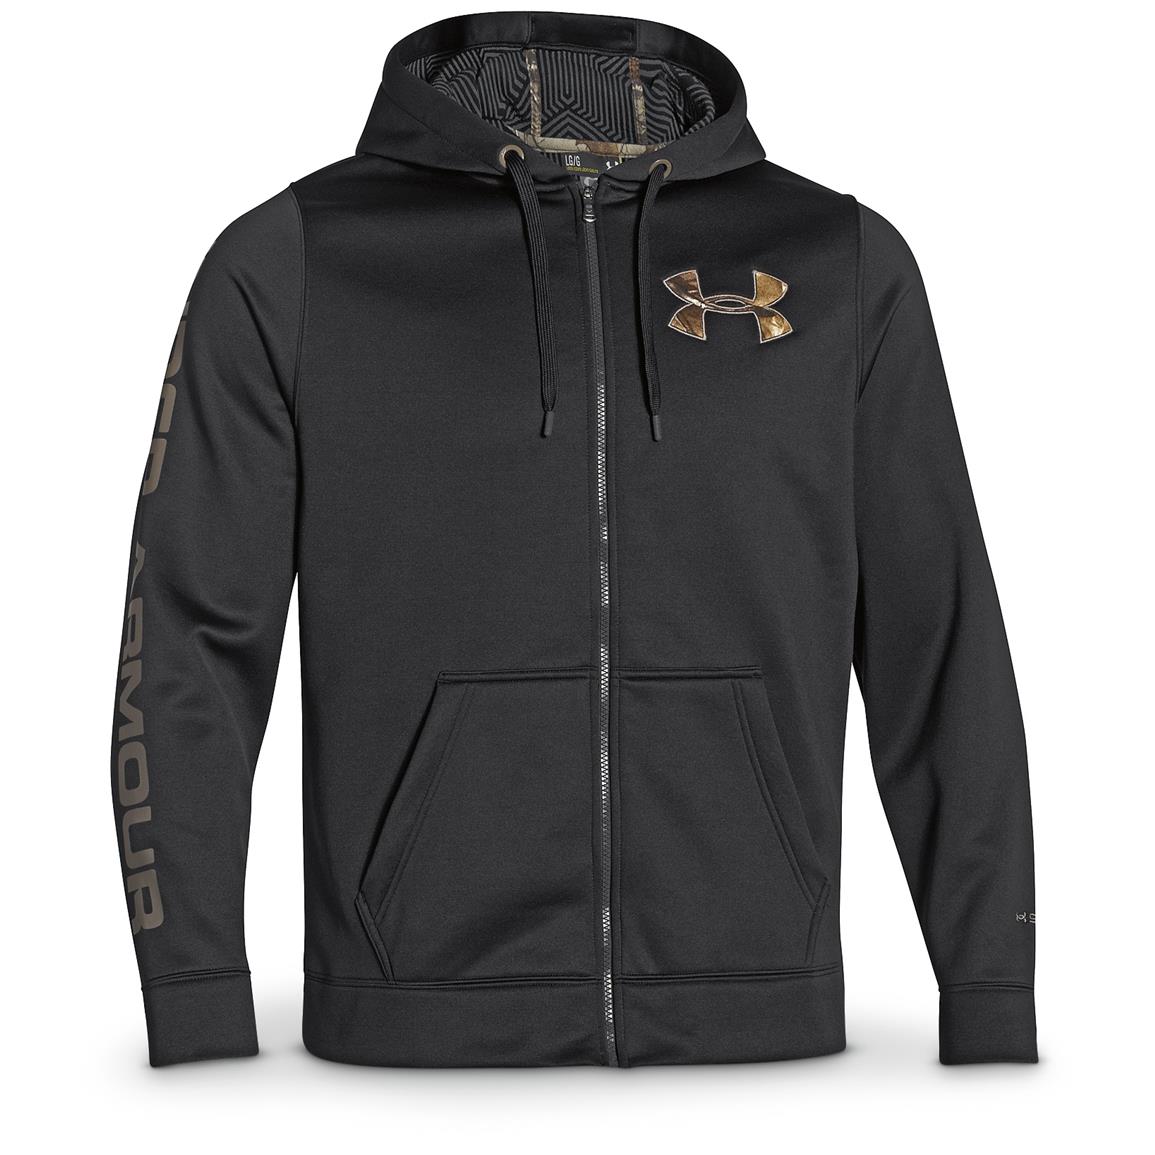 Under Armour Storm Caliber Hoodie Jacket, Water-resistant - 635824, at ...